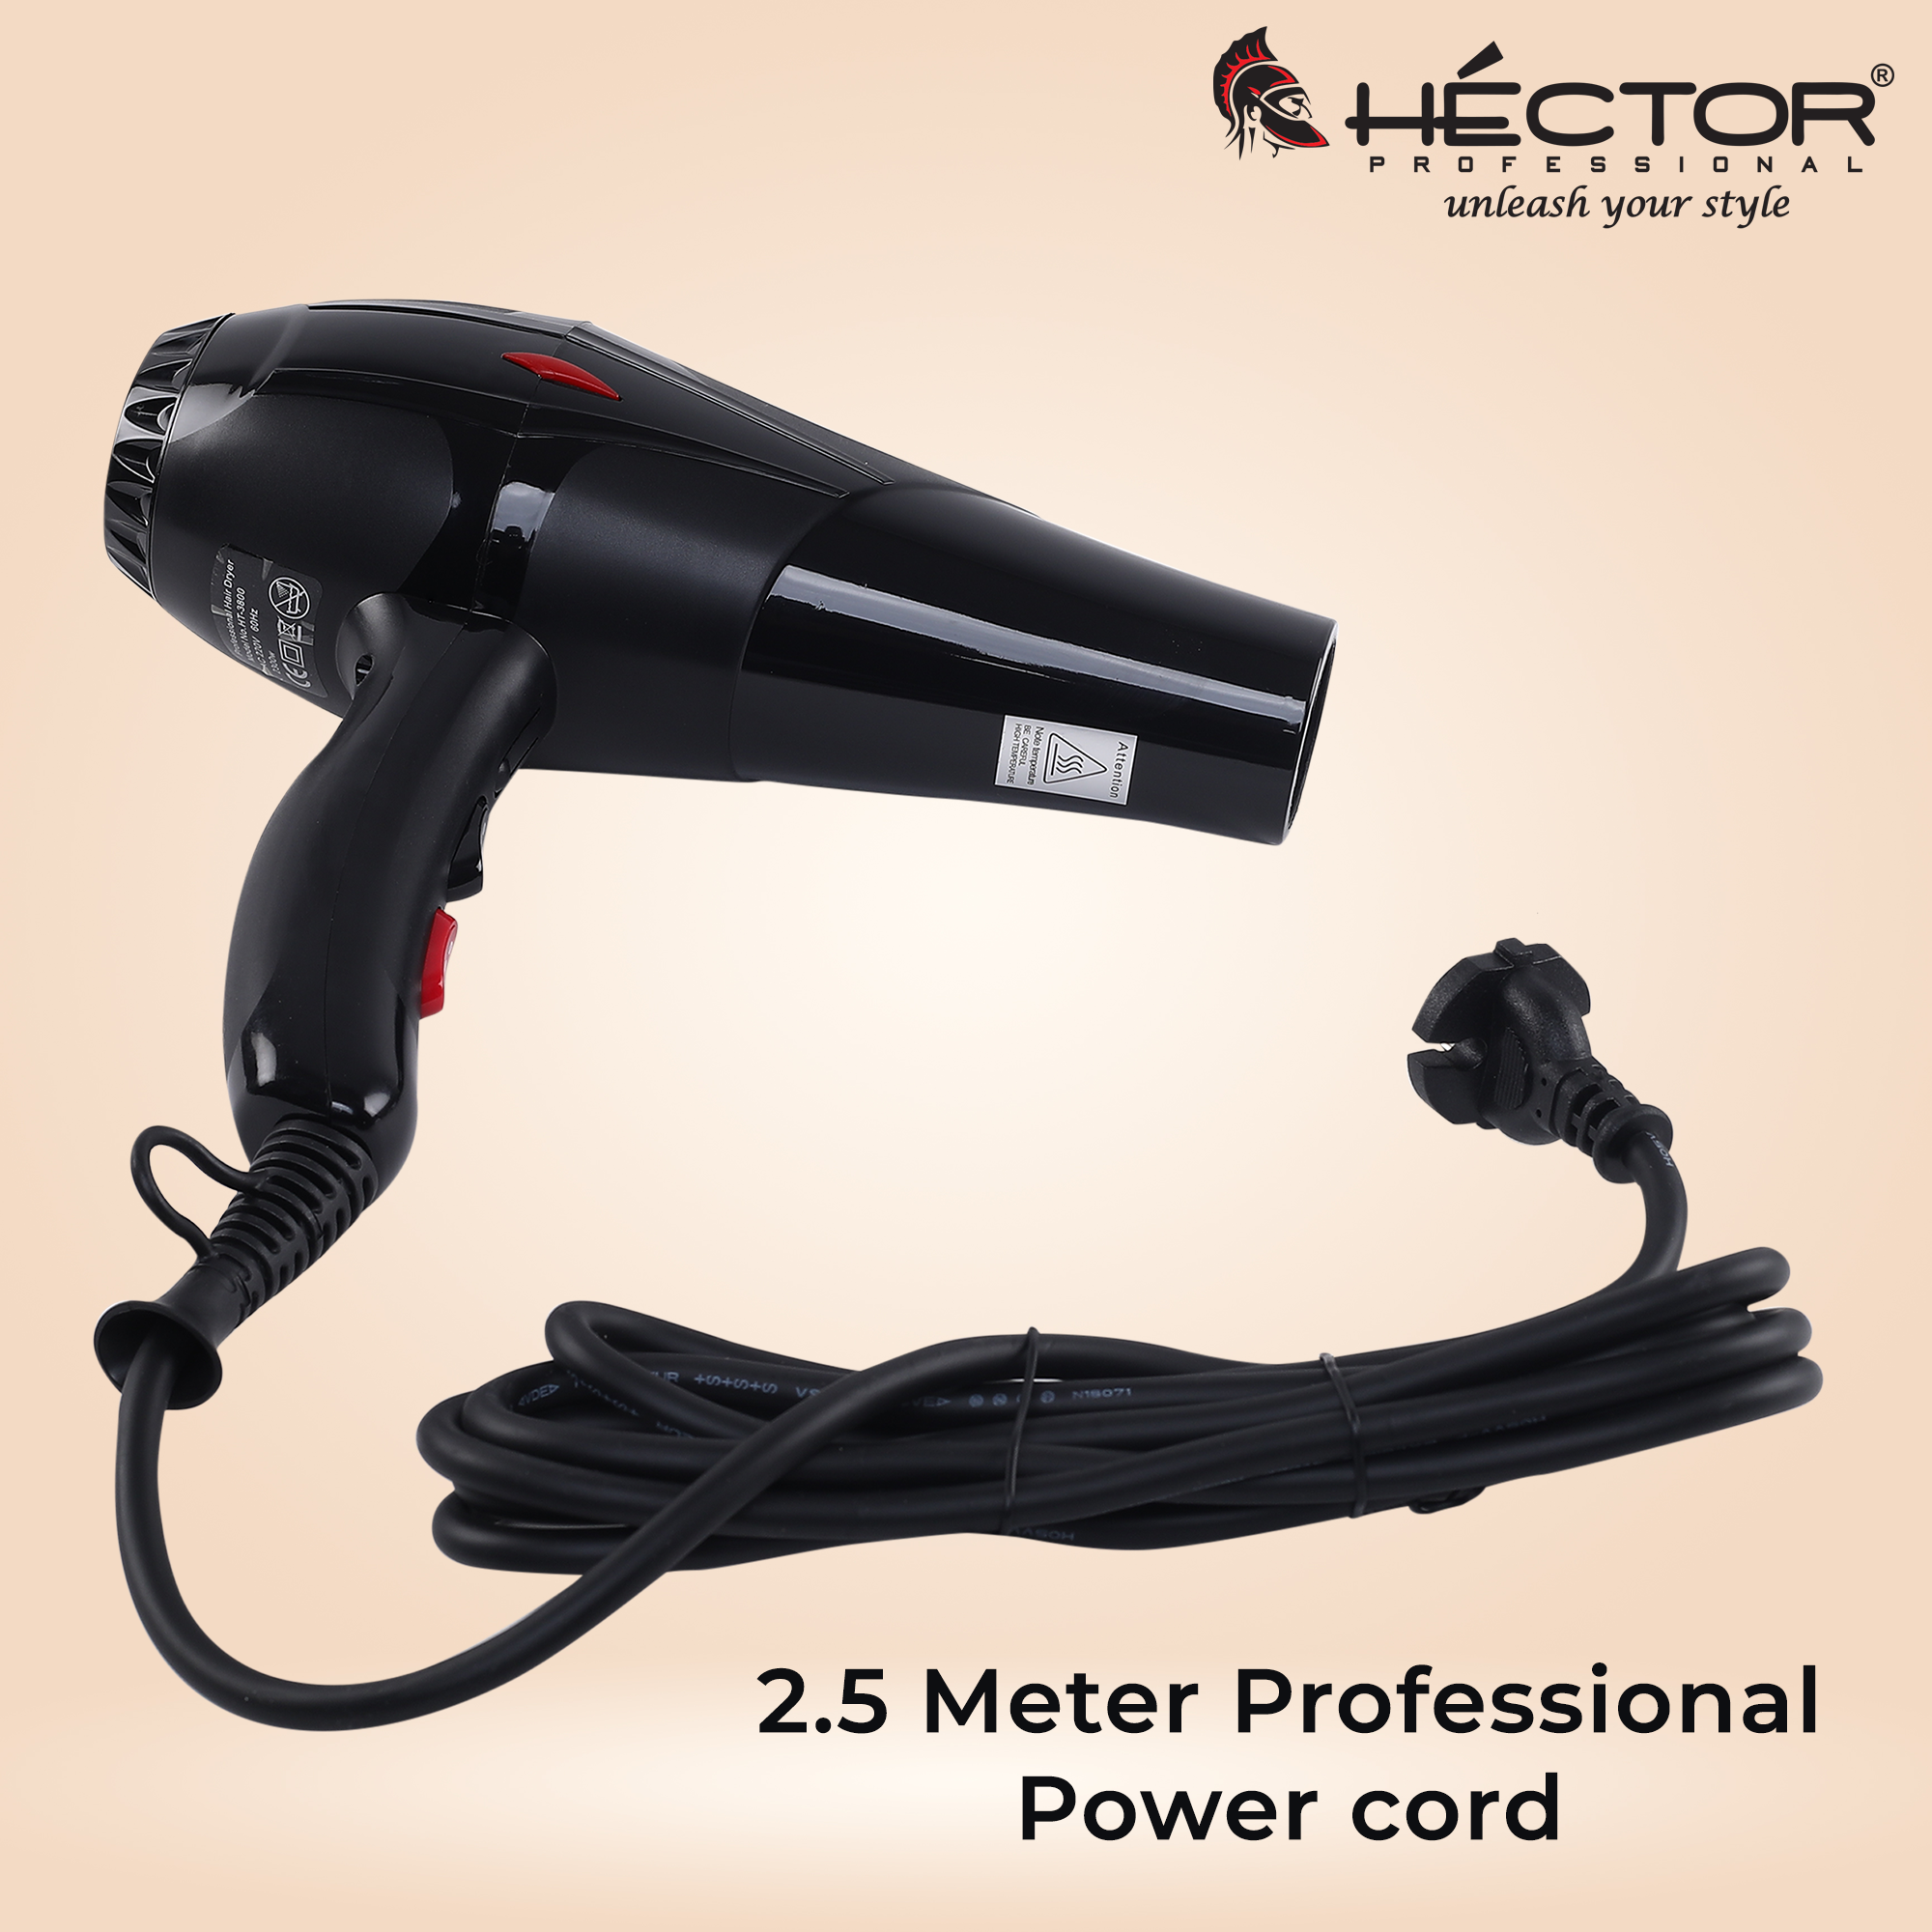 Hector Professional 2300 W Hair Dryer for Personal & Salon use - Just Black